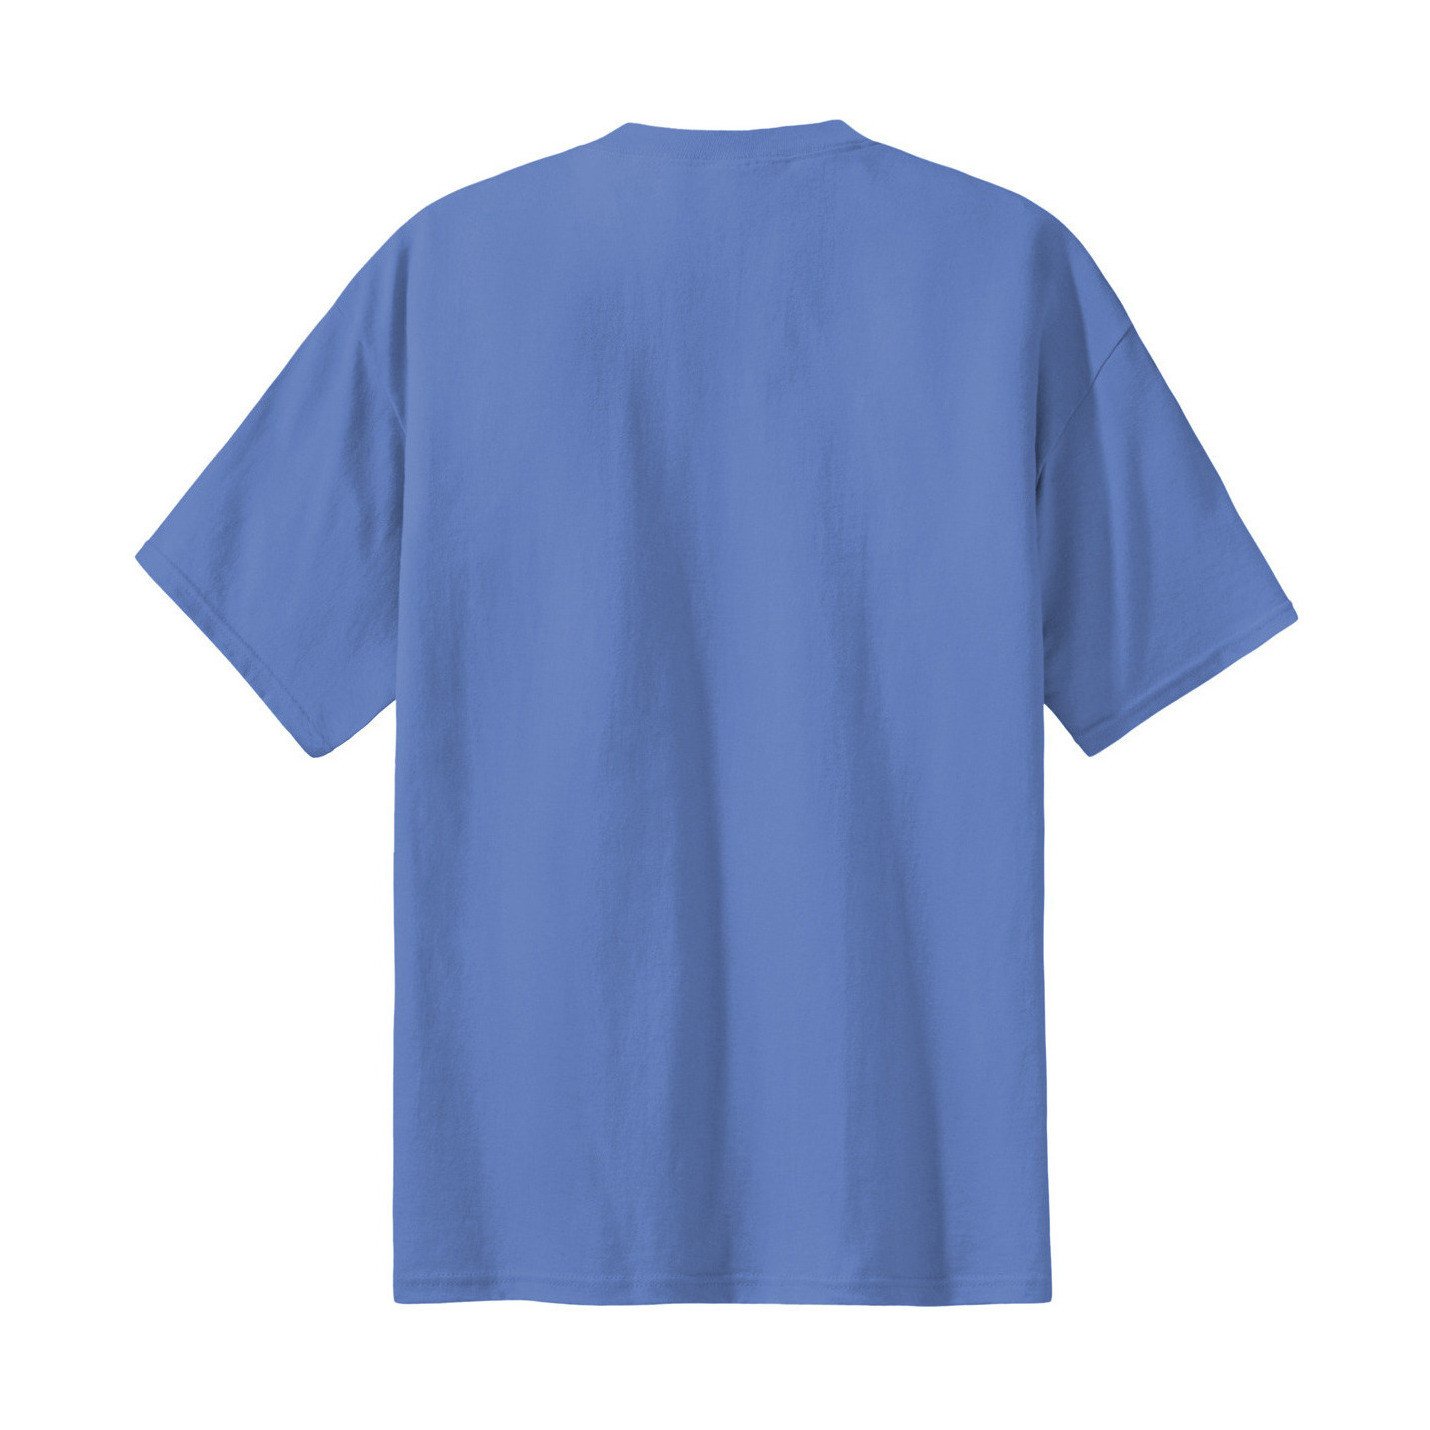 Essential Tee - Apparel - School Products